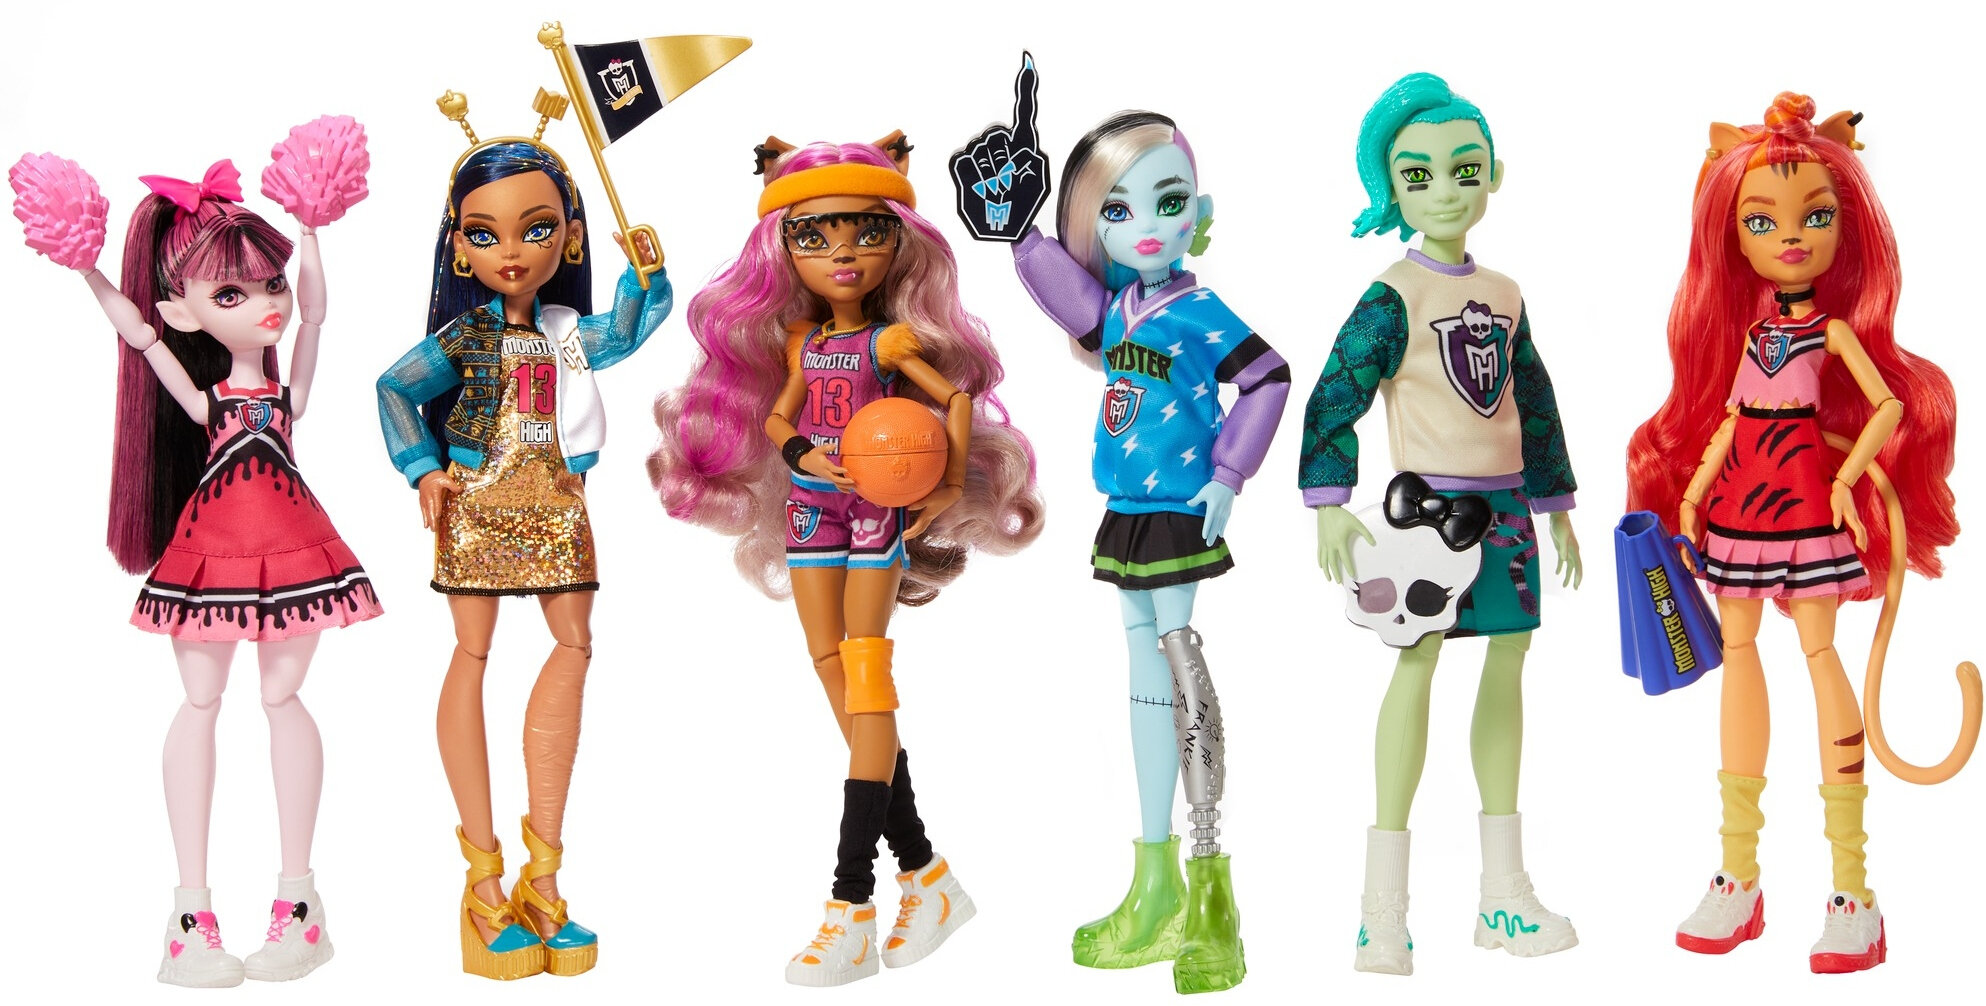 Monster High Ghoul Spirit Doll 6-Pack, Sport Theme, Collectible Set with Draculaura & 5 Other Dolls - image 1 of 6